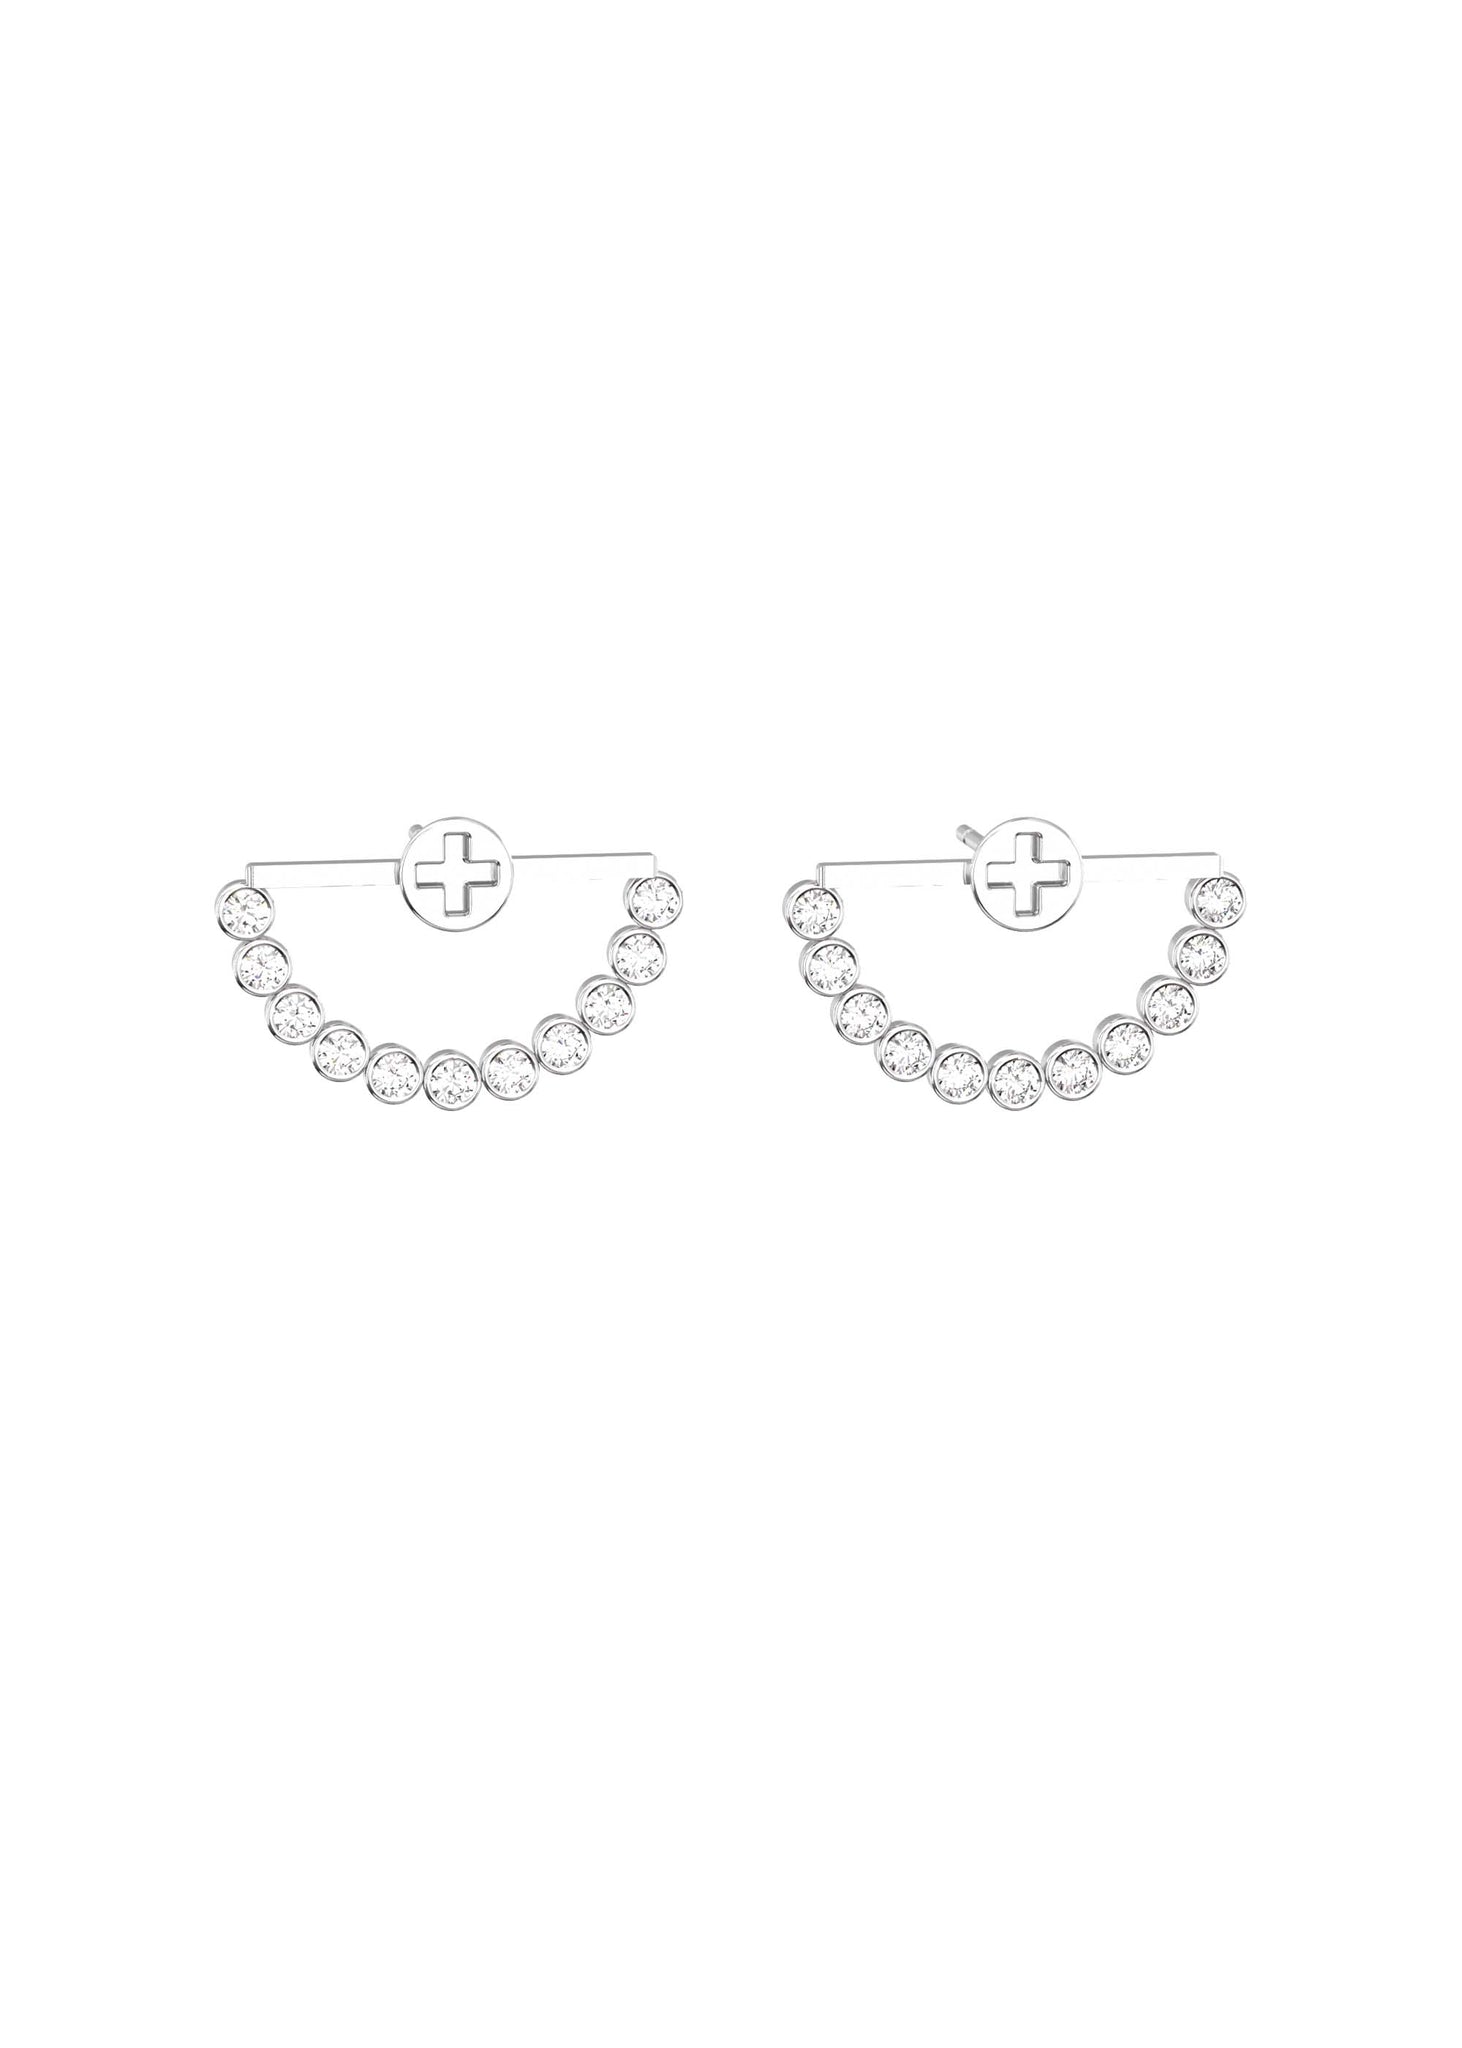 TOGGLER: Semicircle Earring Pair - 157Moments